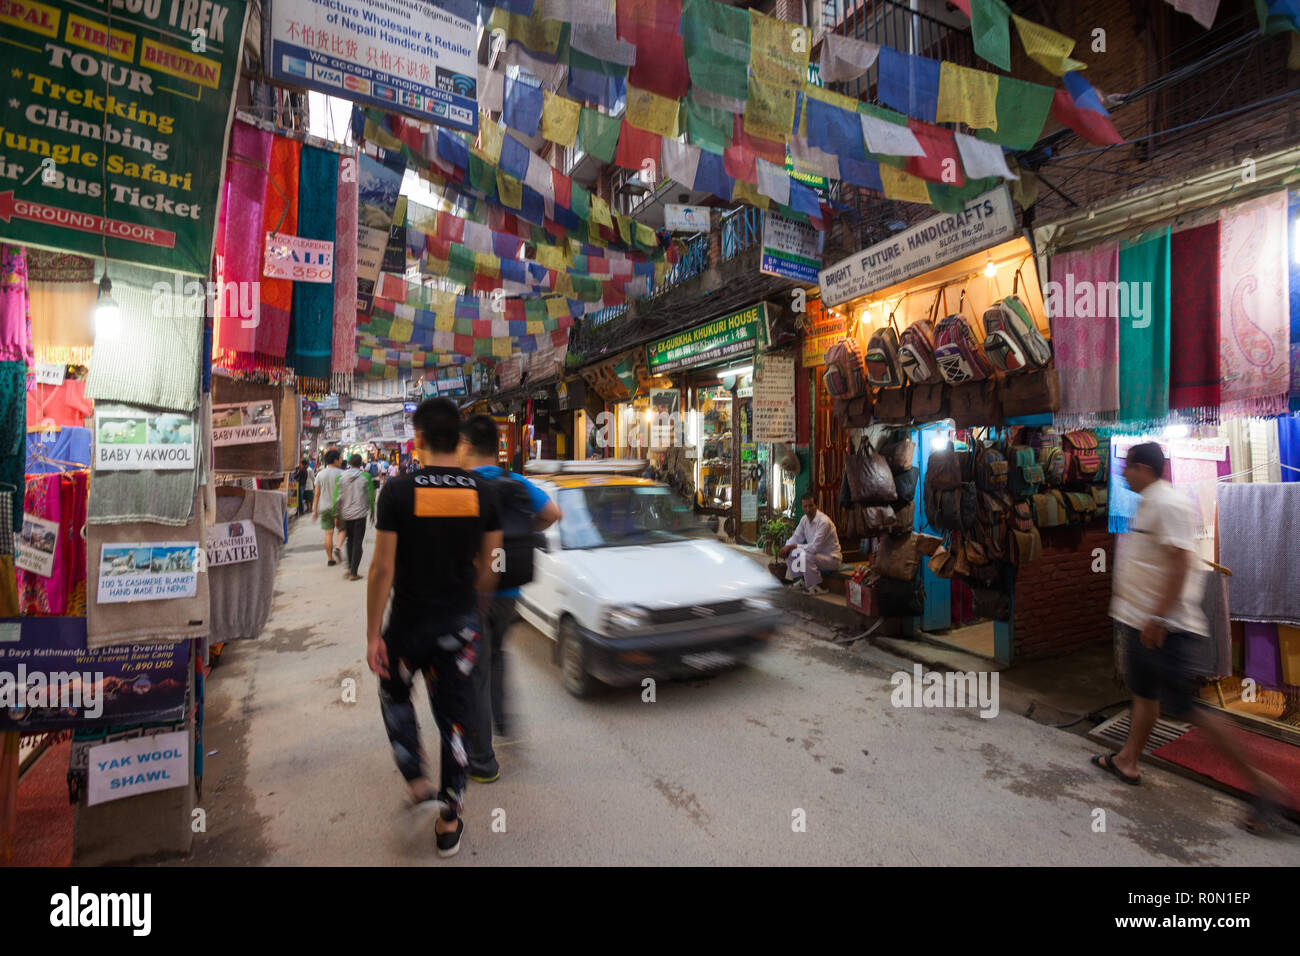 Passerby and vehicles in the narrow streets of Kathmandu's Thamel district, Nepal Stock Photo